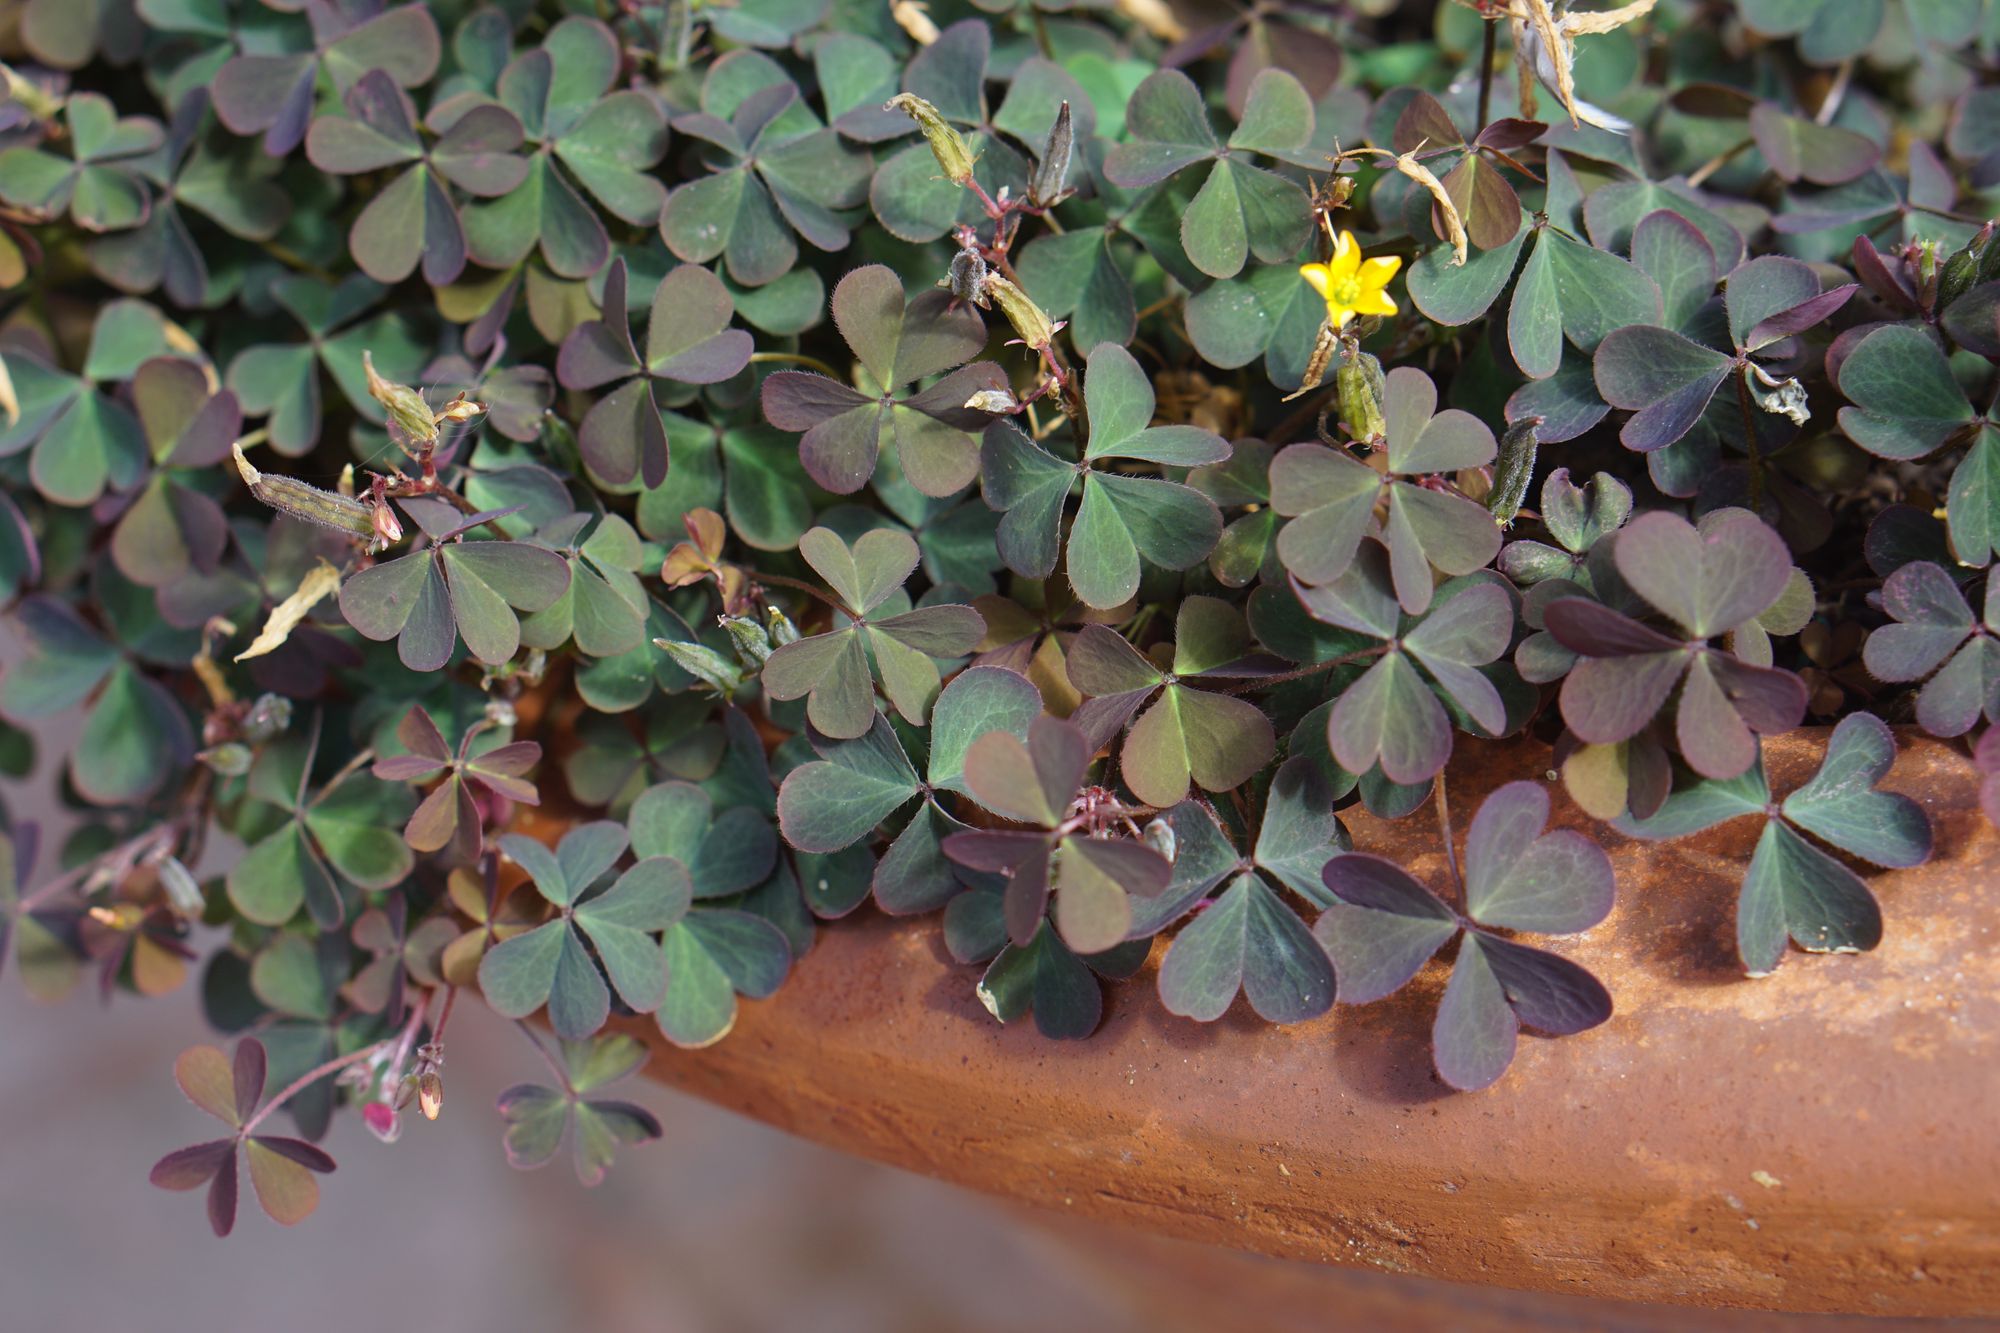 A creeping plant with green-purple leaves and a small number of tiny yellow flowers spills over the edge of a large terracotta pot.